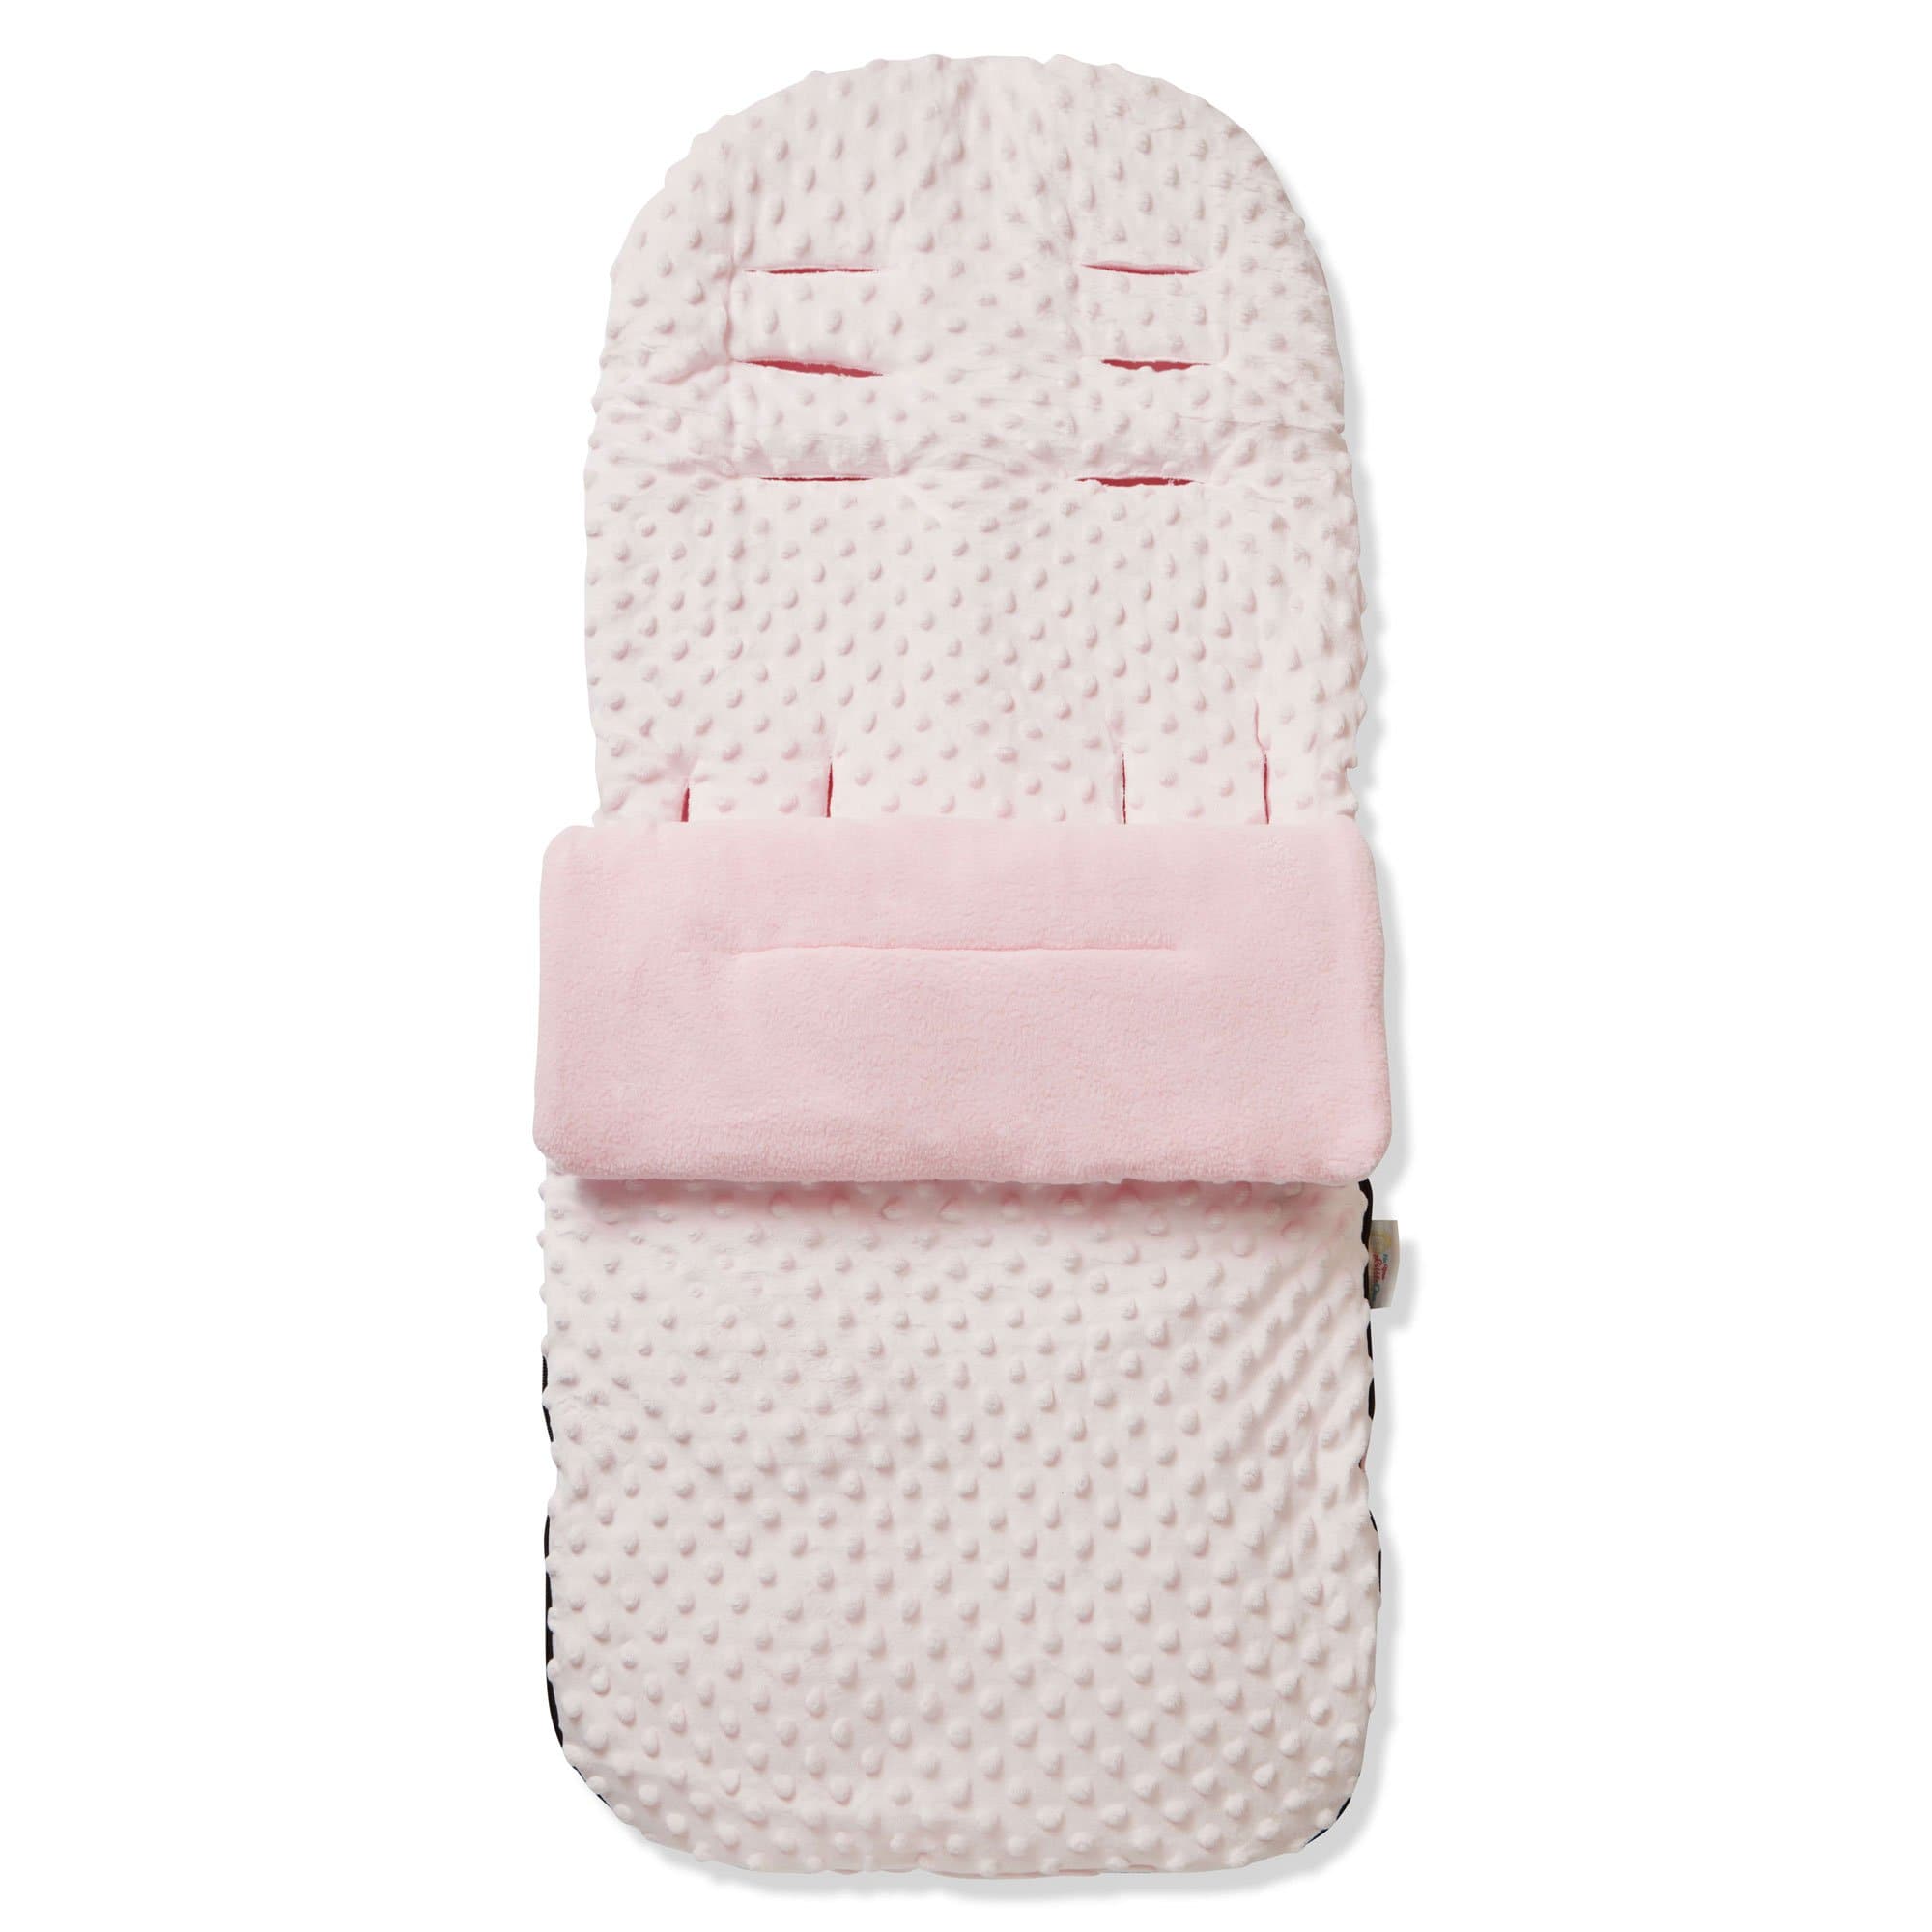 Dimple Footmuff / Cosy Toes Compatible with DoBuggy - Pink / Fits All Models | For Your Little One